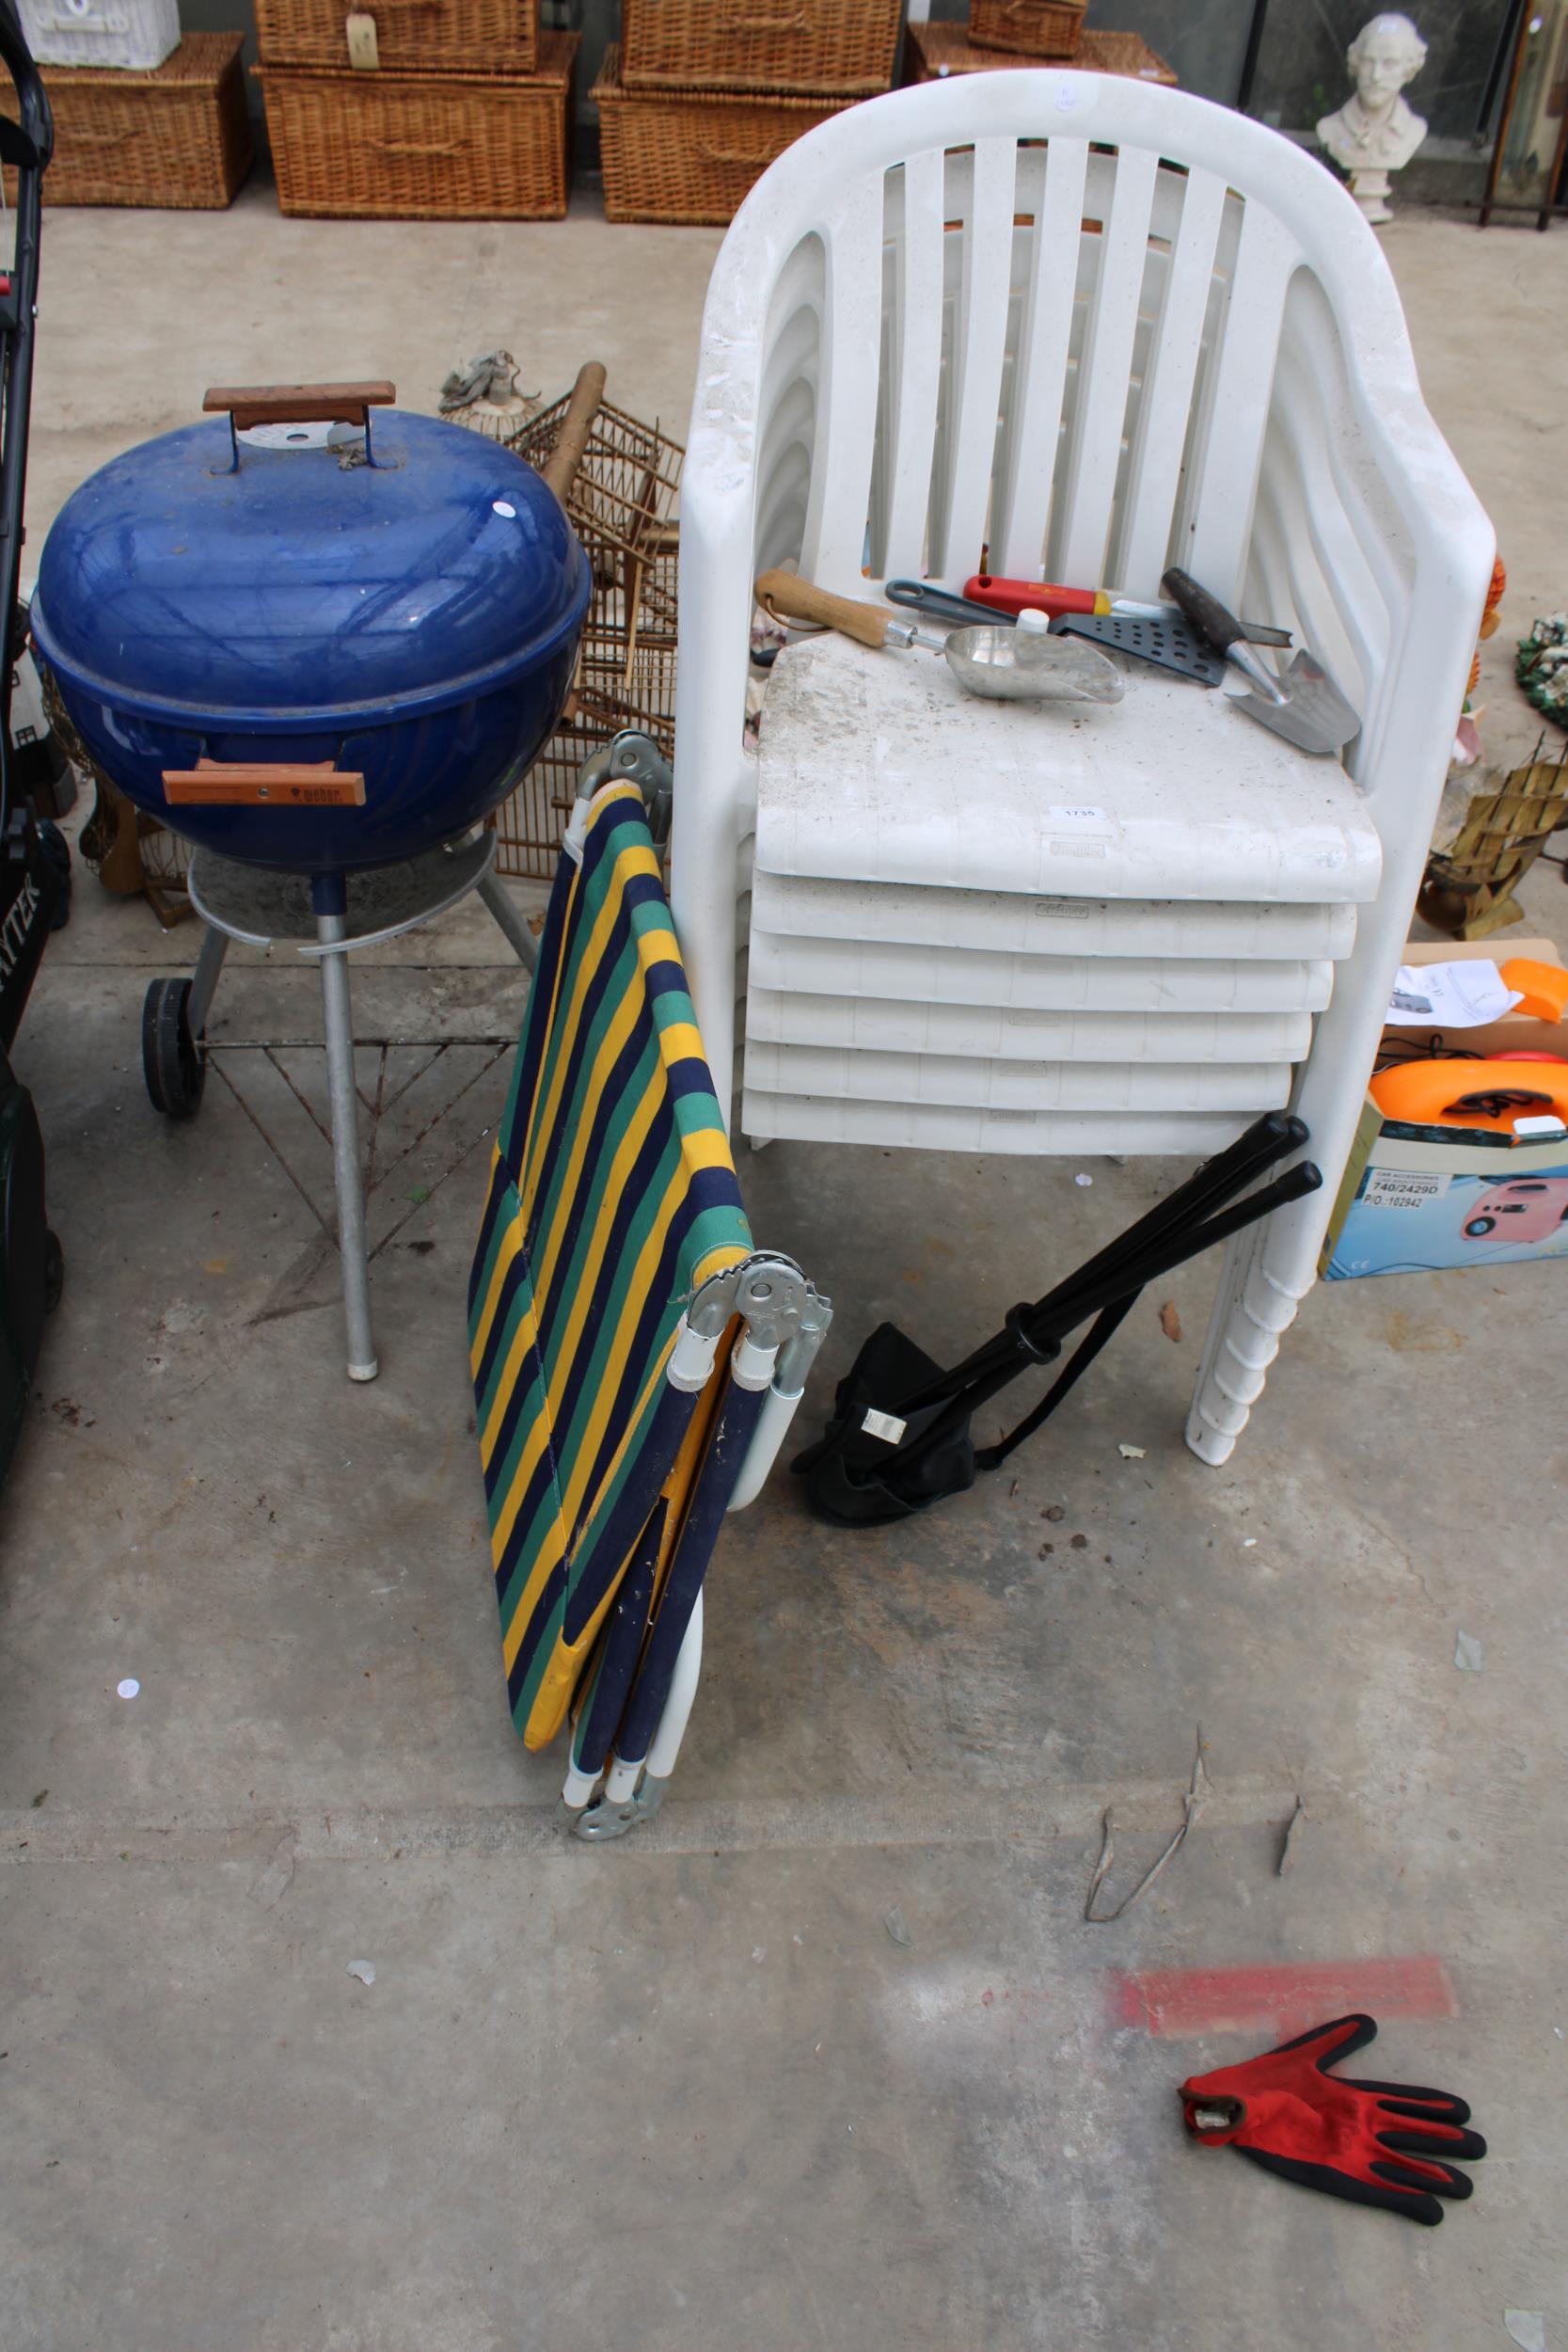 SIX PLASTIC STACKING CHAIRS, A FOLDING CHAIR AND A BBQ